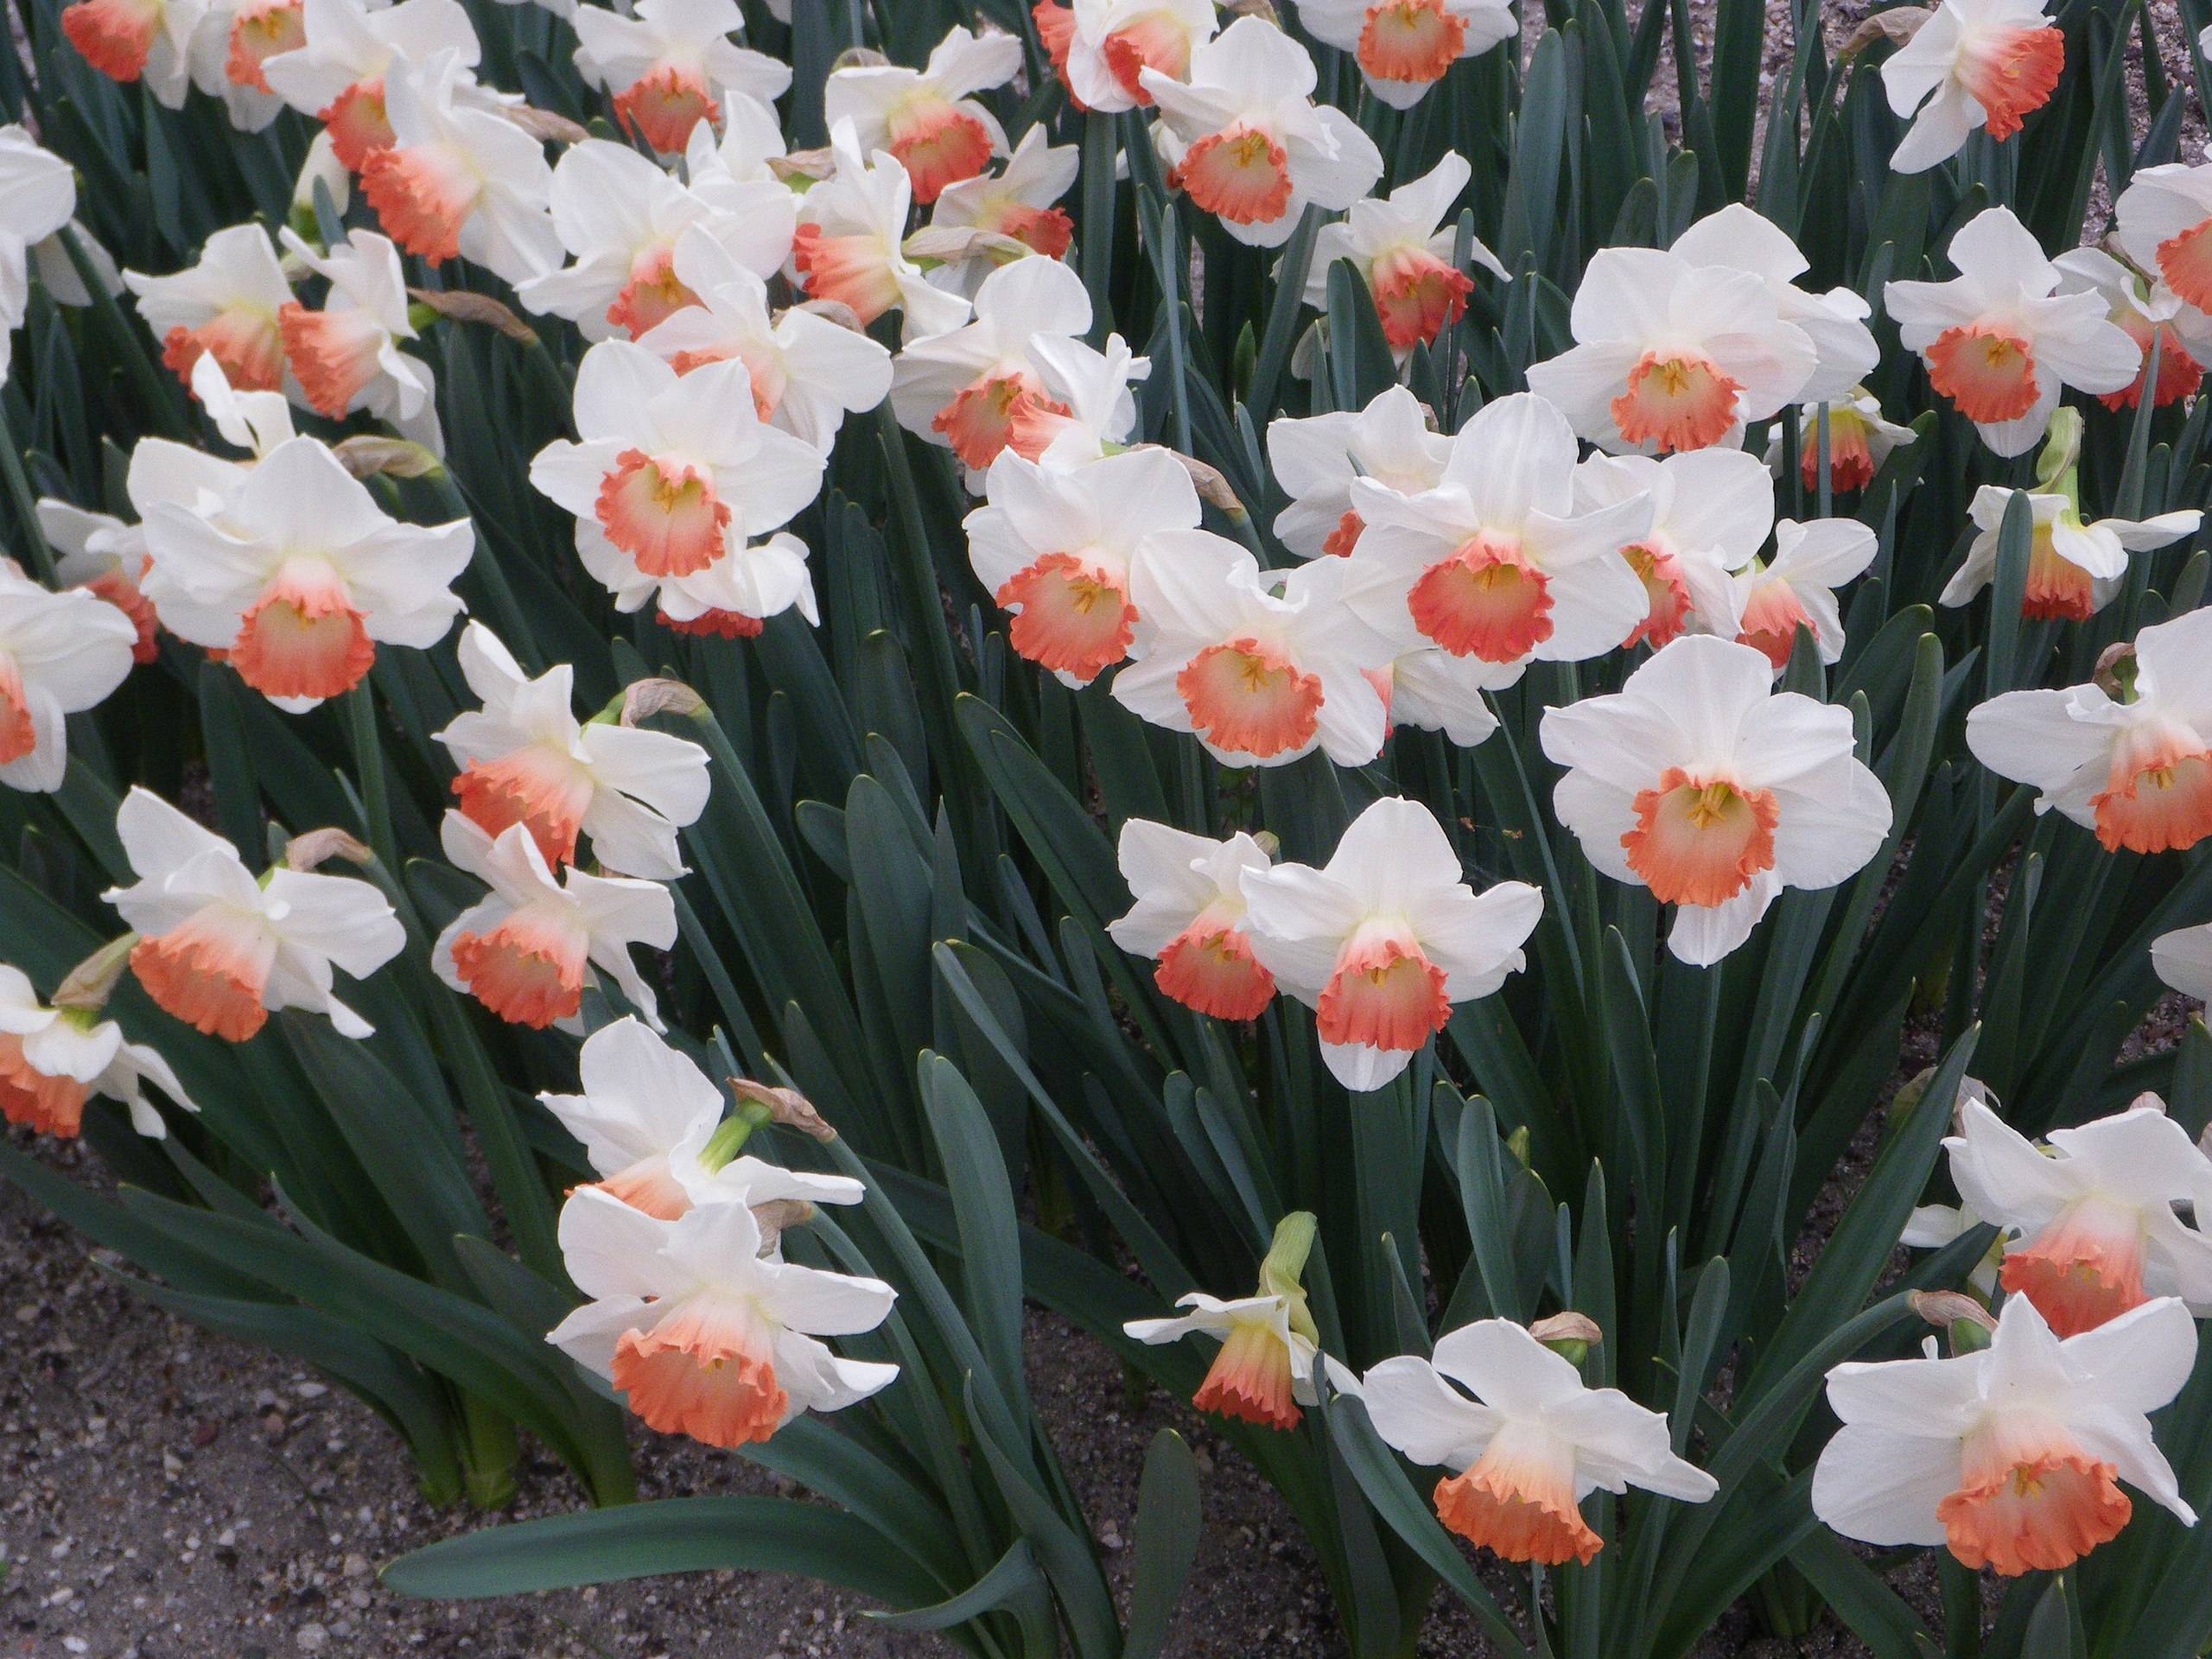 white flowers with peach-orange center, dark-green leaves and stems